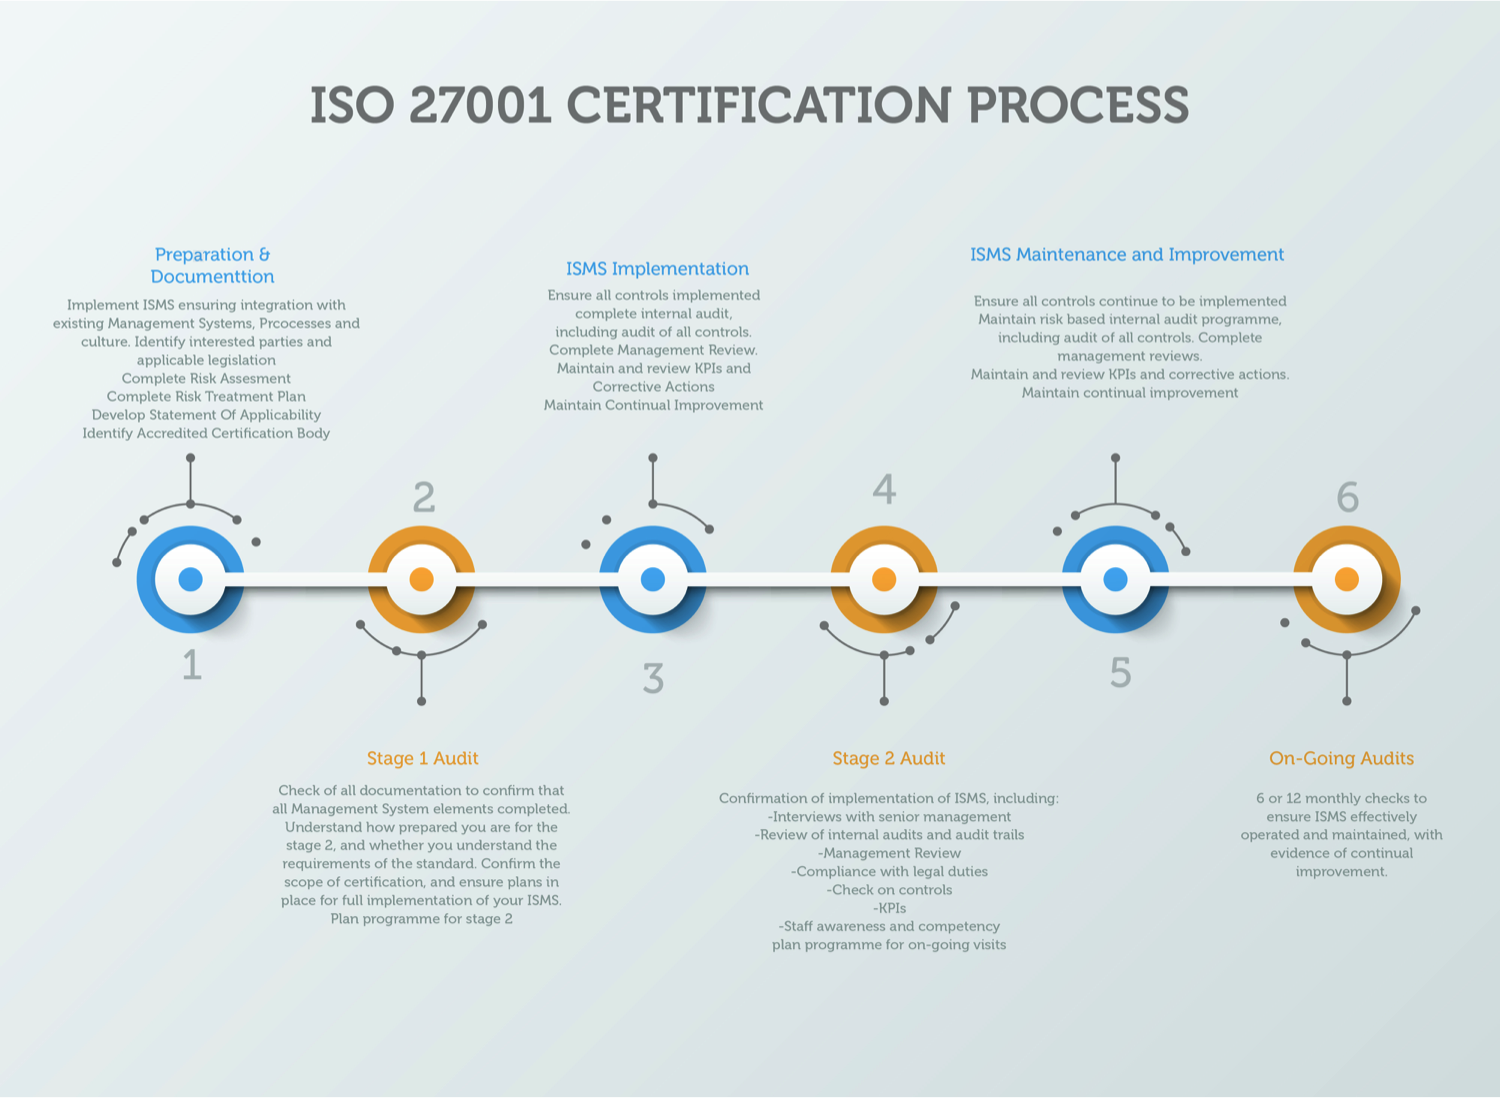 ISO27001 Implementation process overview